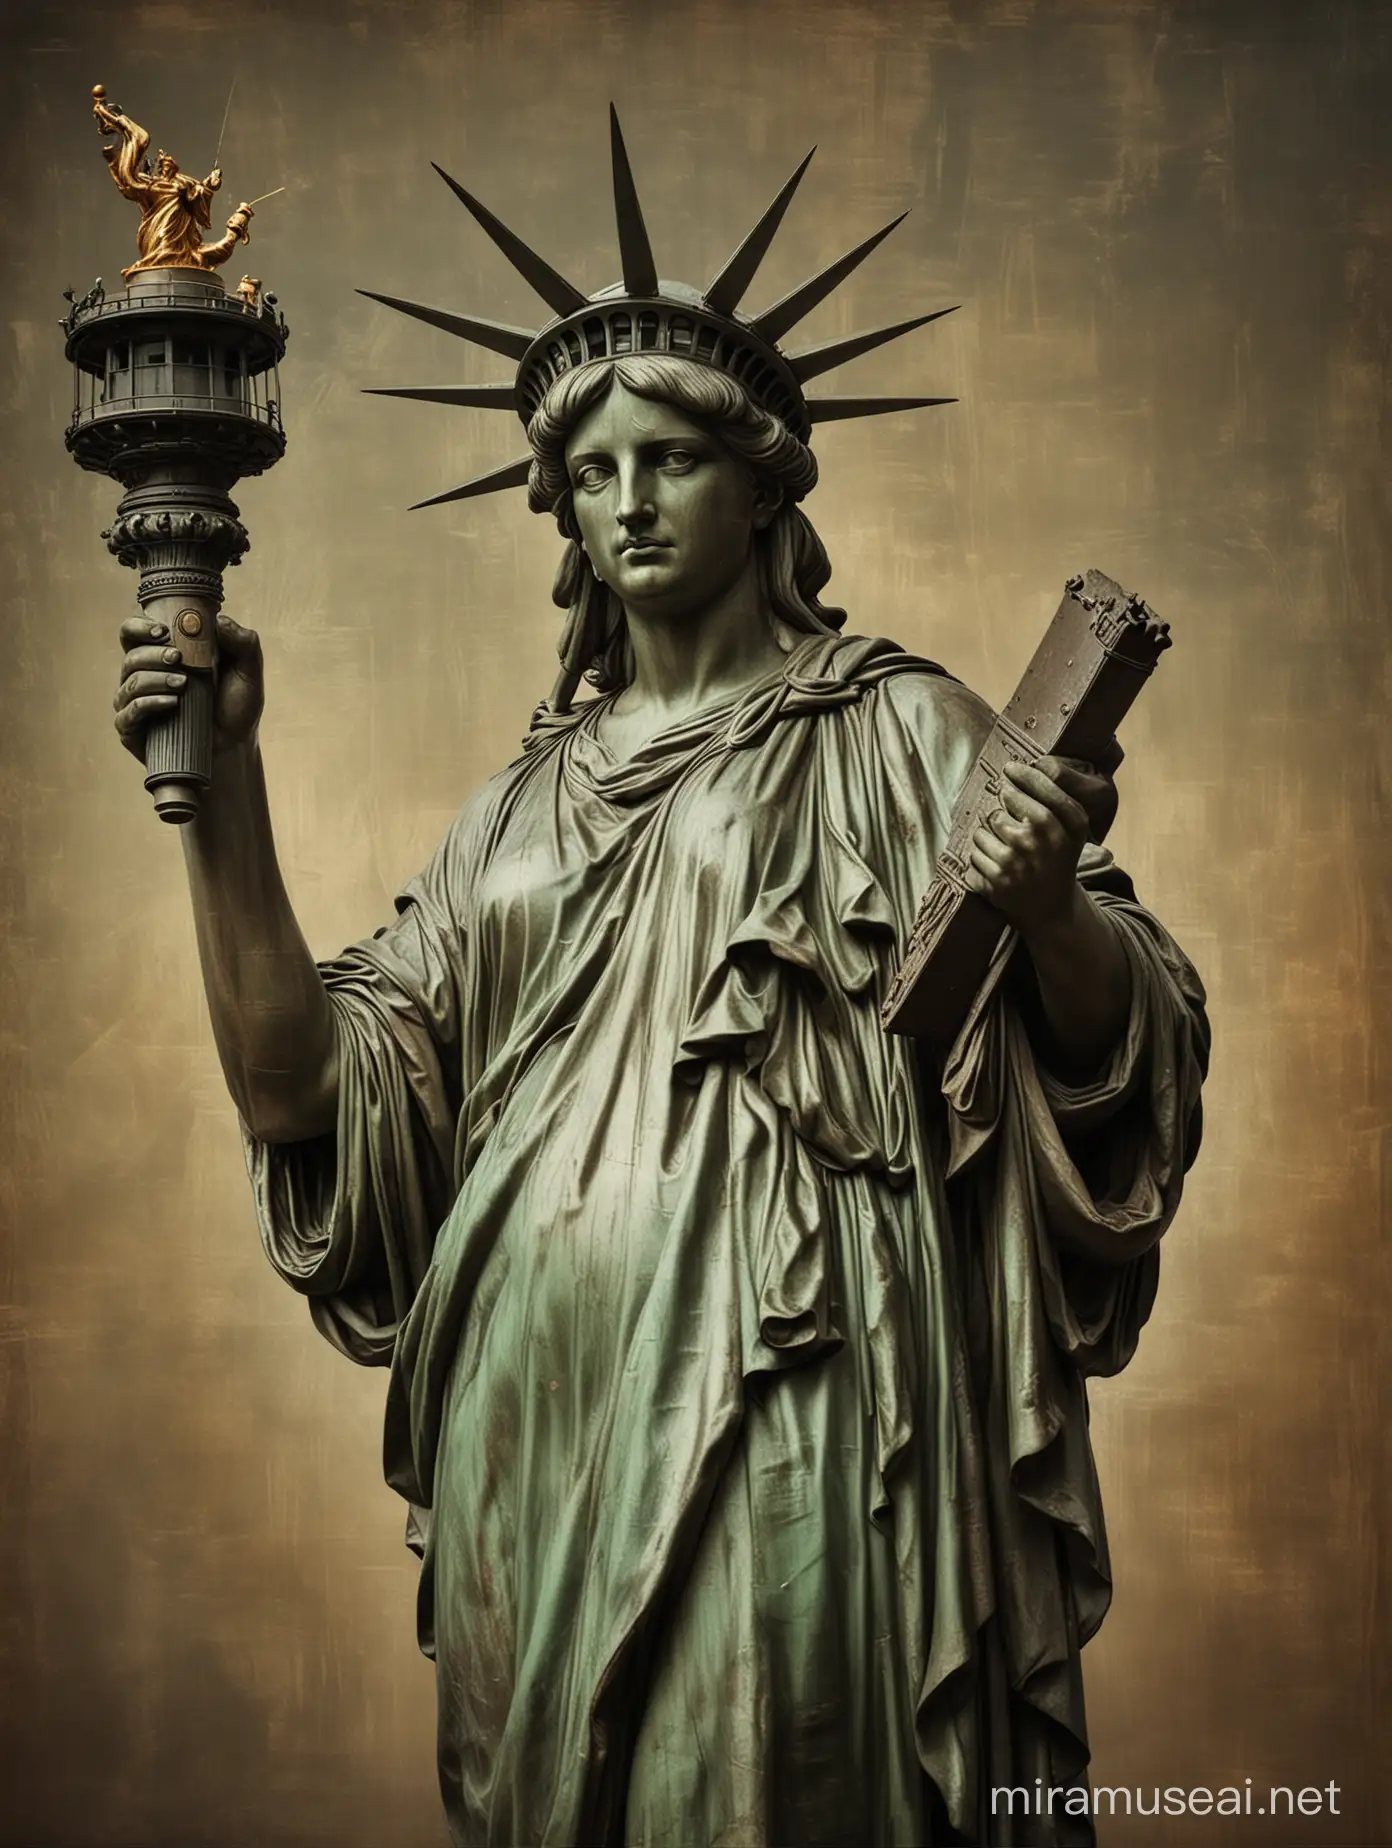 A picture of the Statue of Liberty in New York in the style of 1600 century artist Caravaggio.